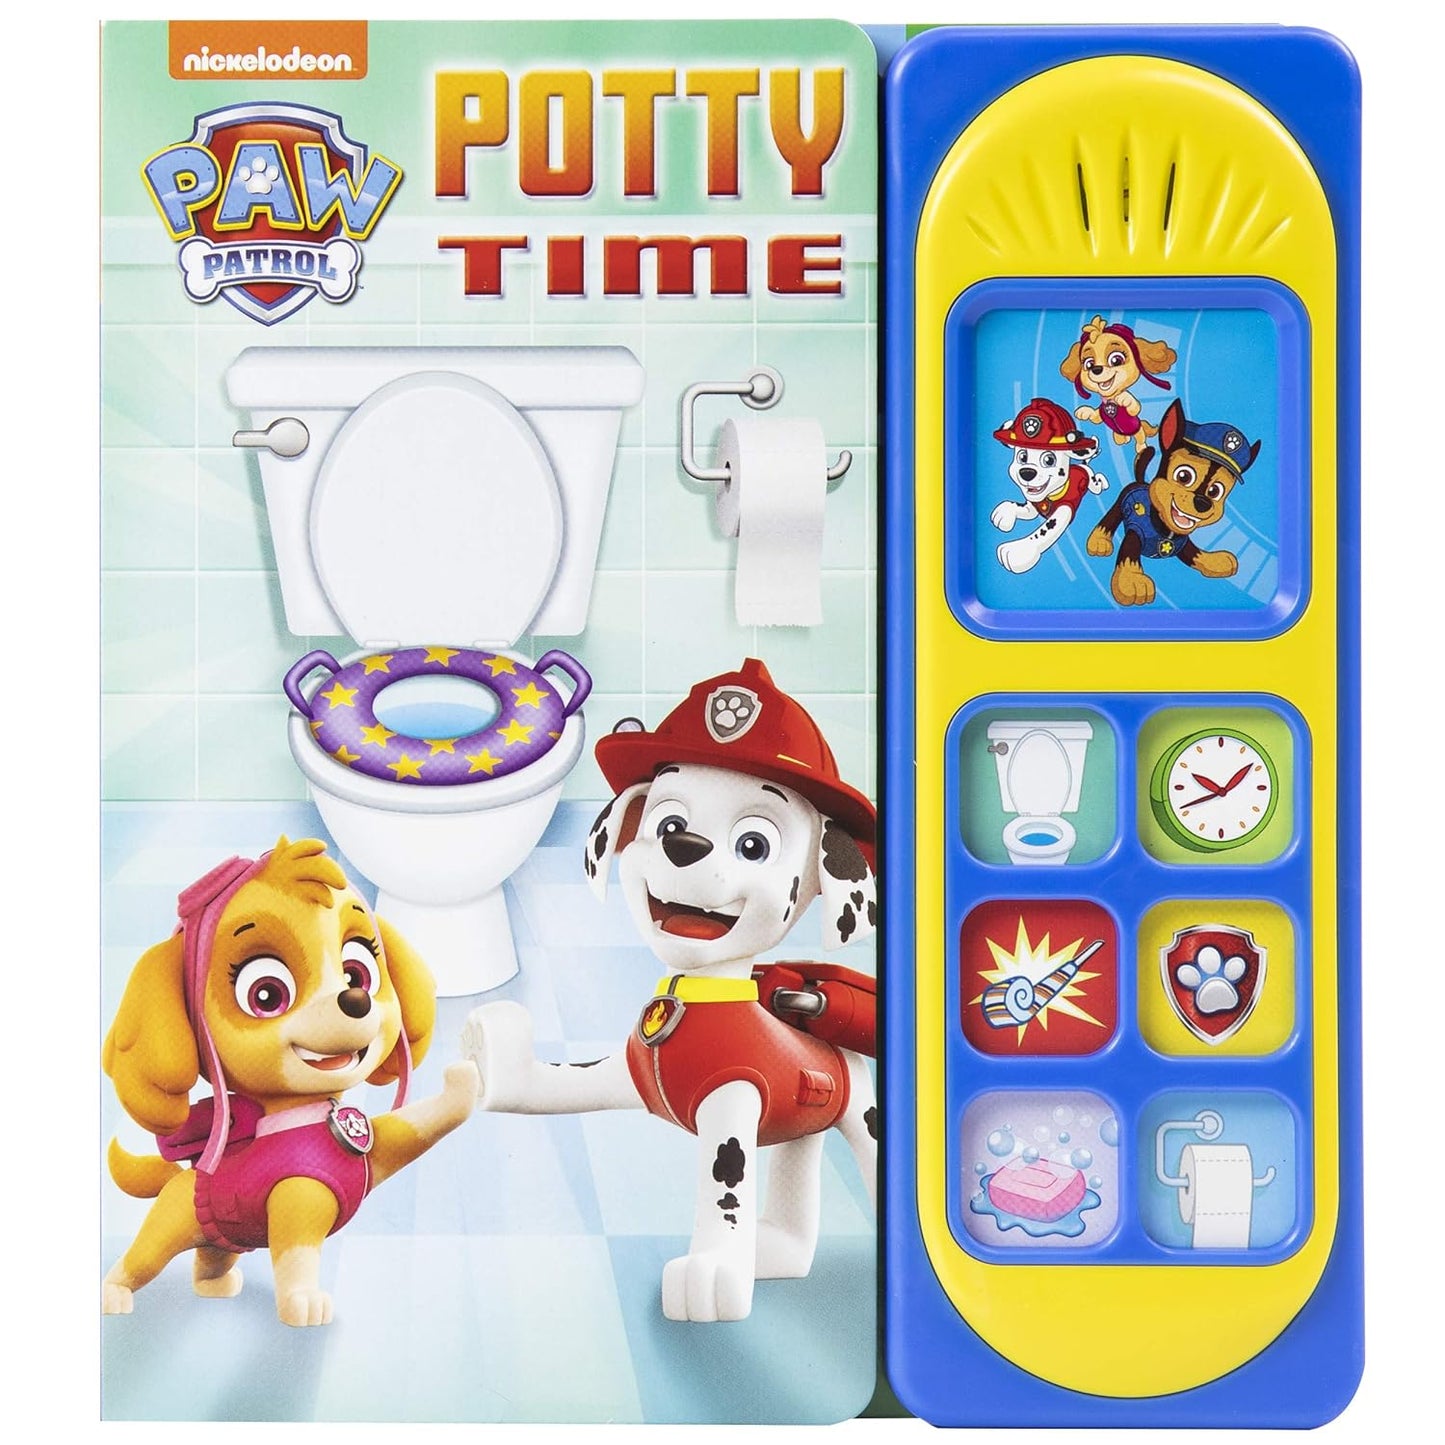 PAW Patrol Chase, Skye, Marshall, and More! - Potty Time - Potty Training Sound Book - PI Kids (Play-A-Sound)